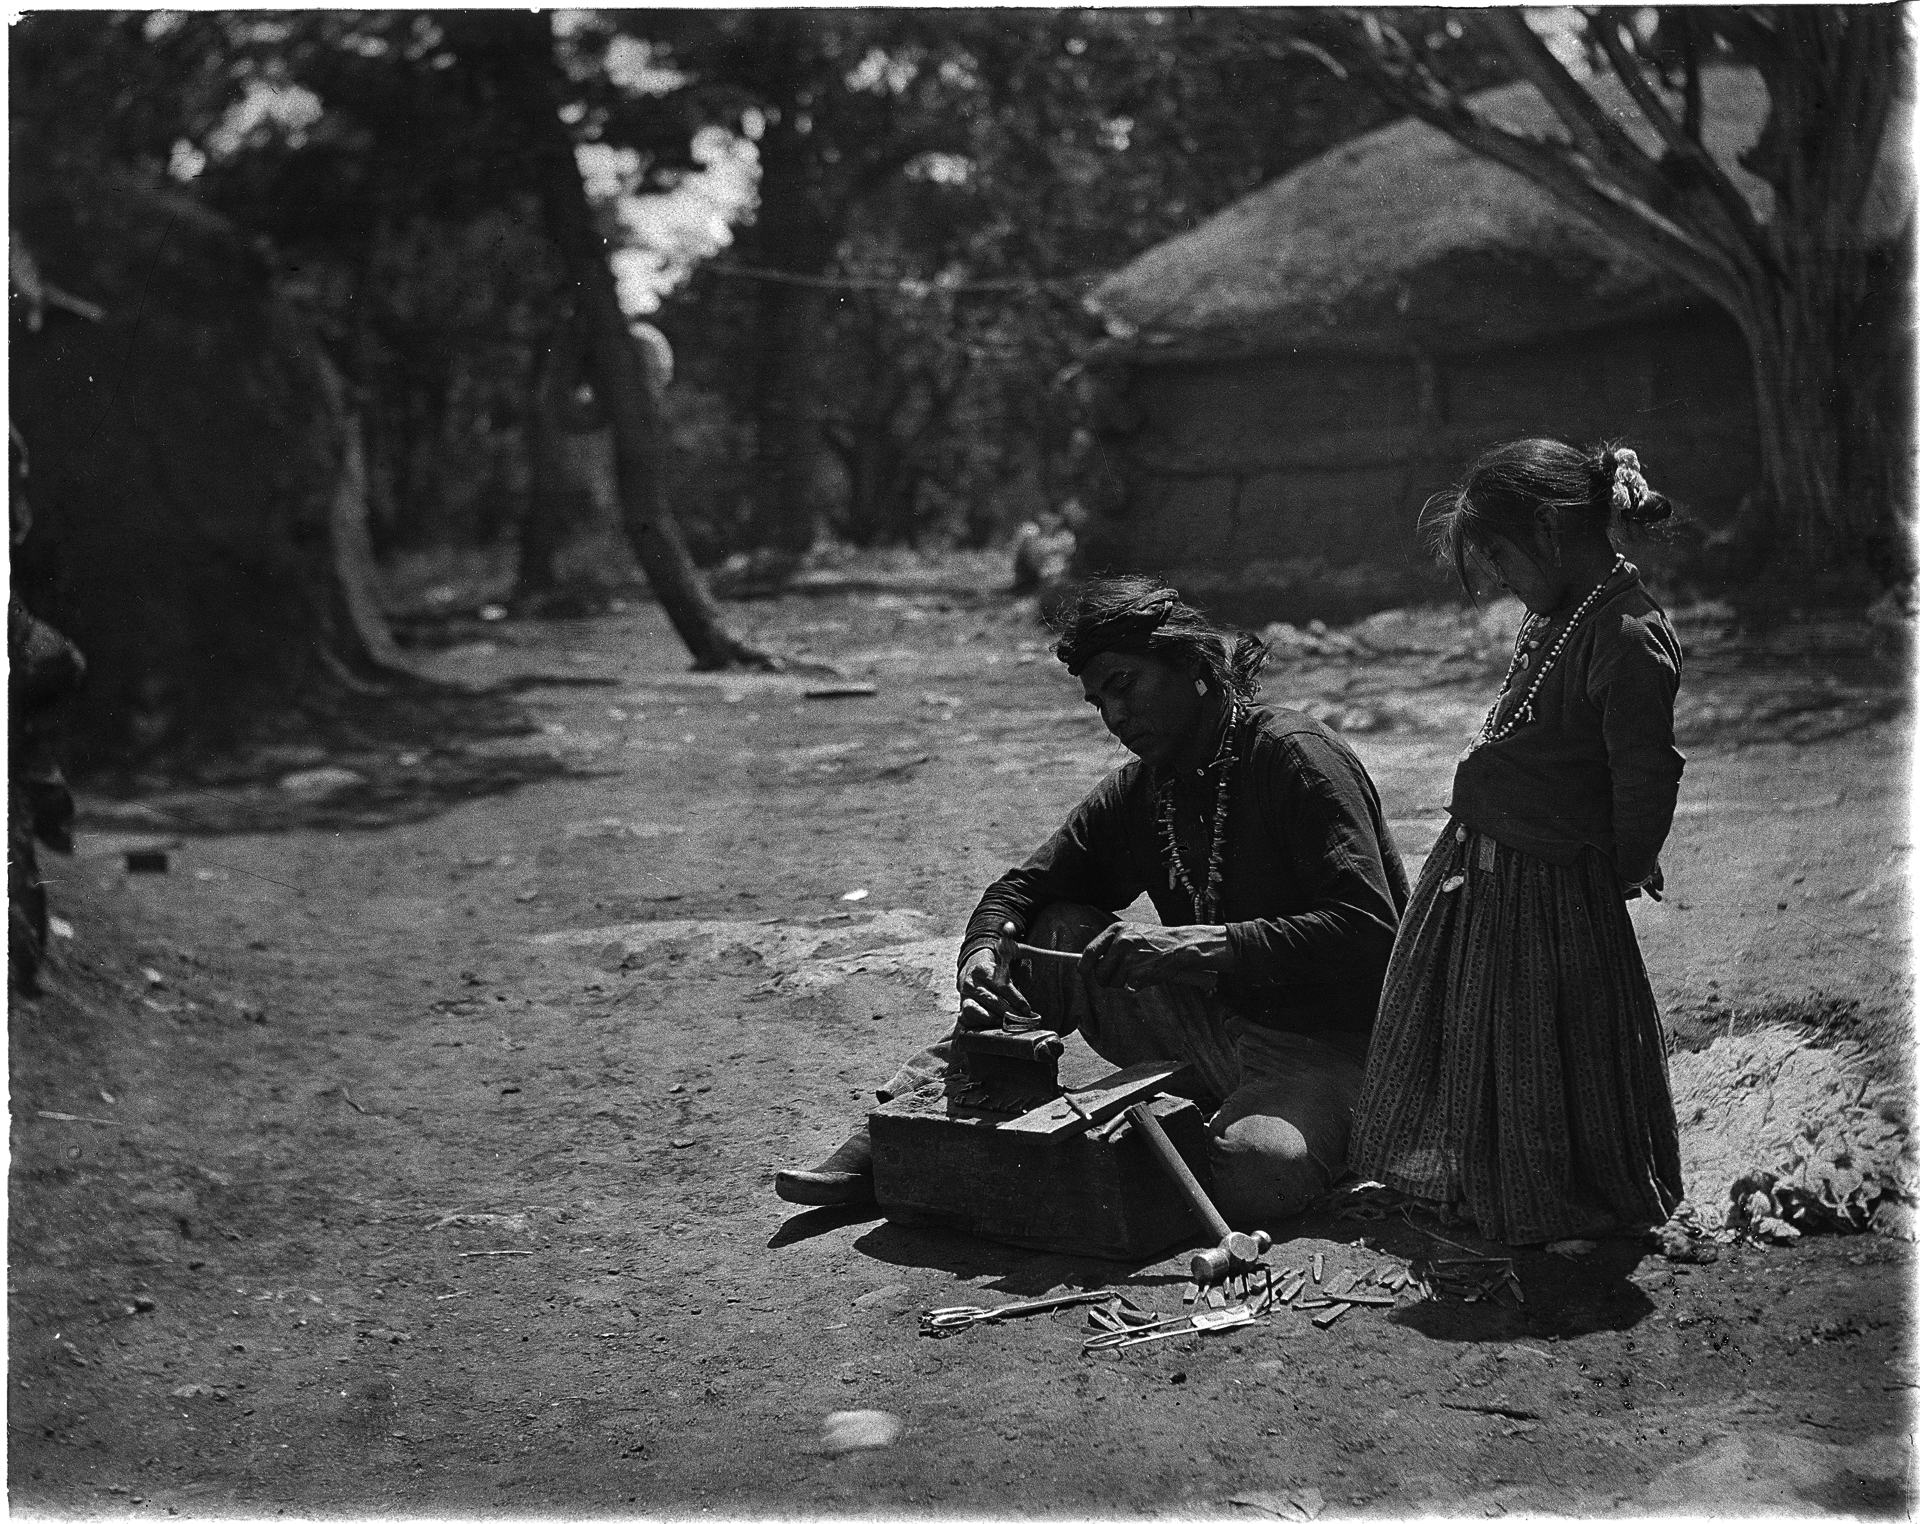 Black and white photo of a child standing next to a sitting adult hammering at an object. Behind and to their left are trees and a house-like structure. 